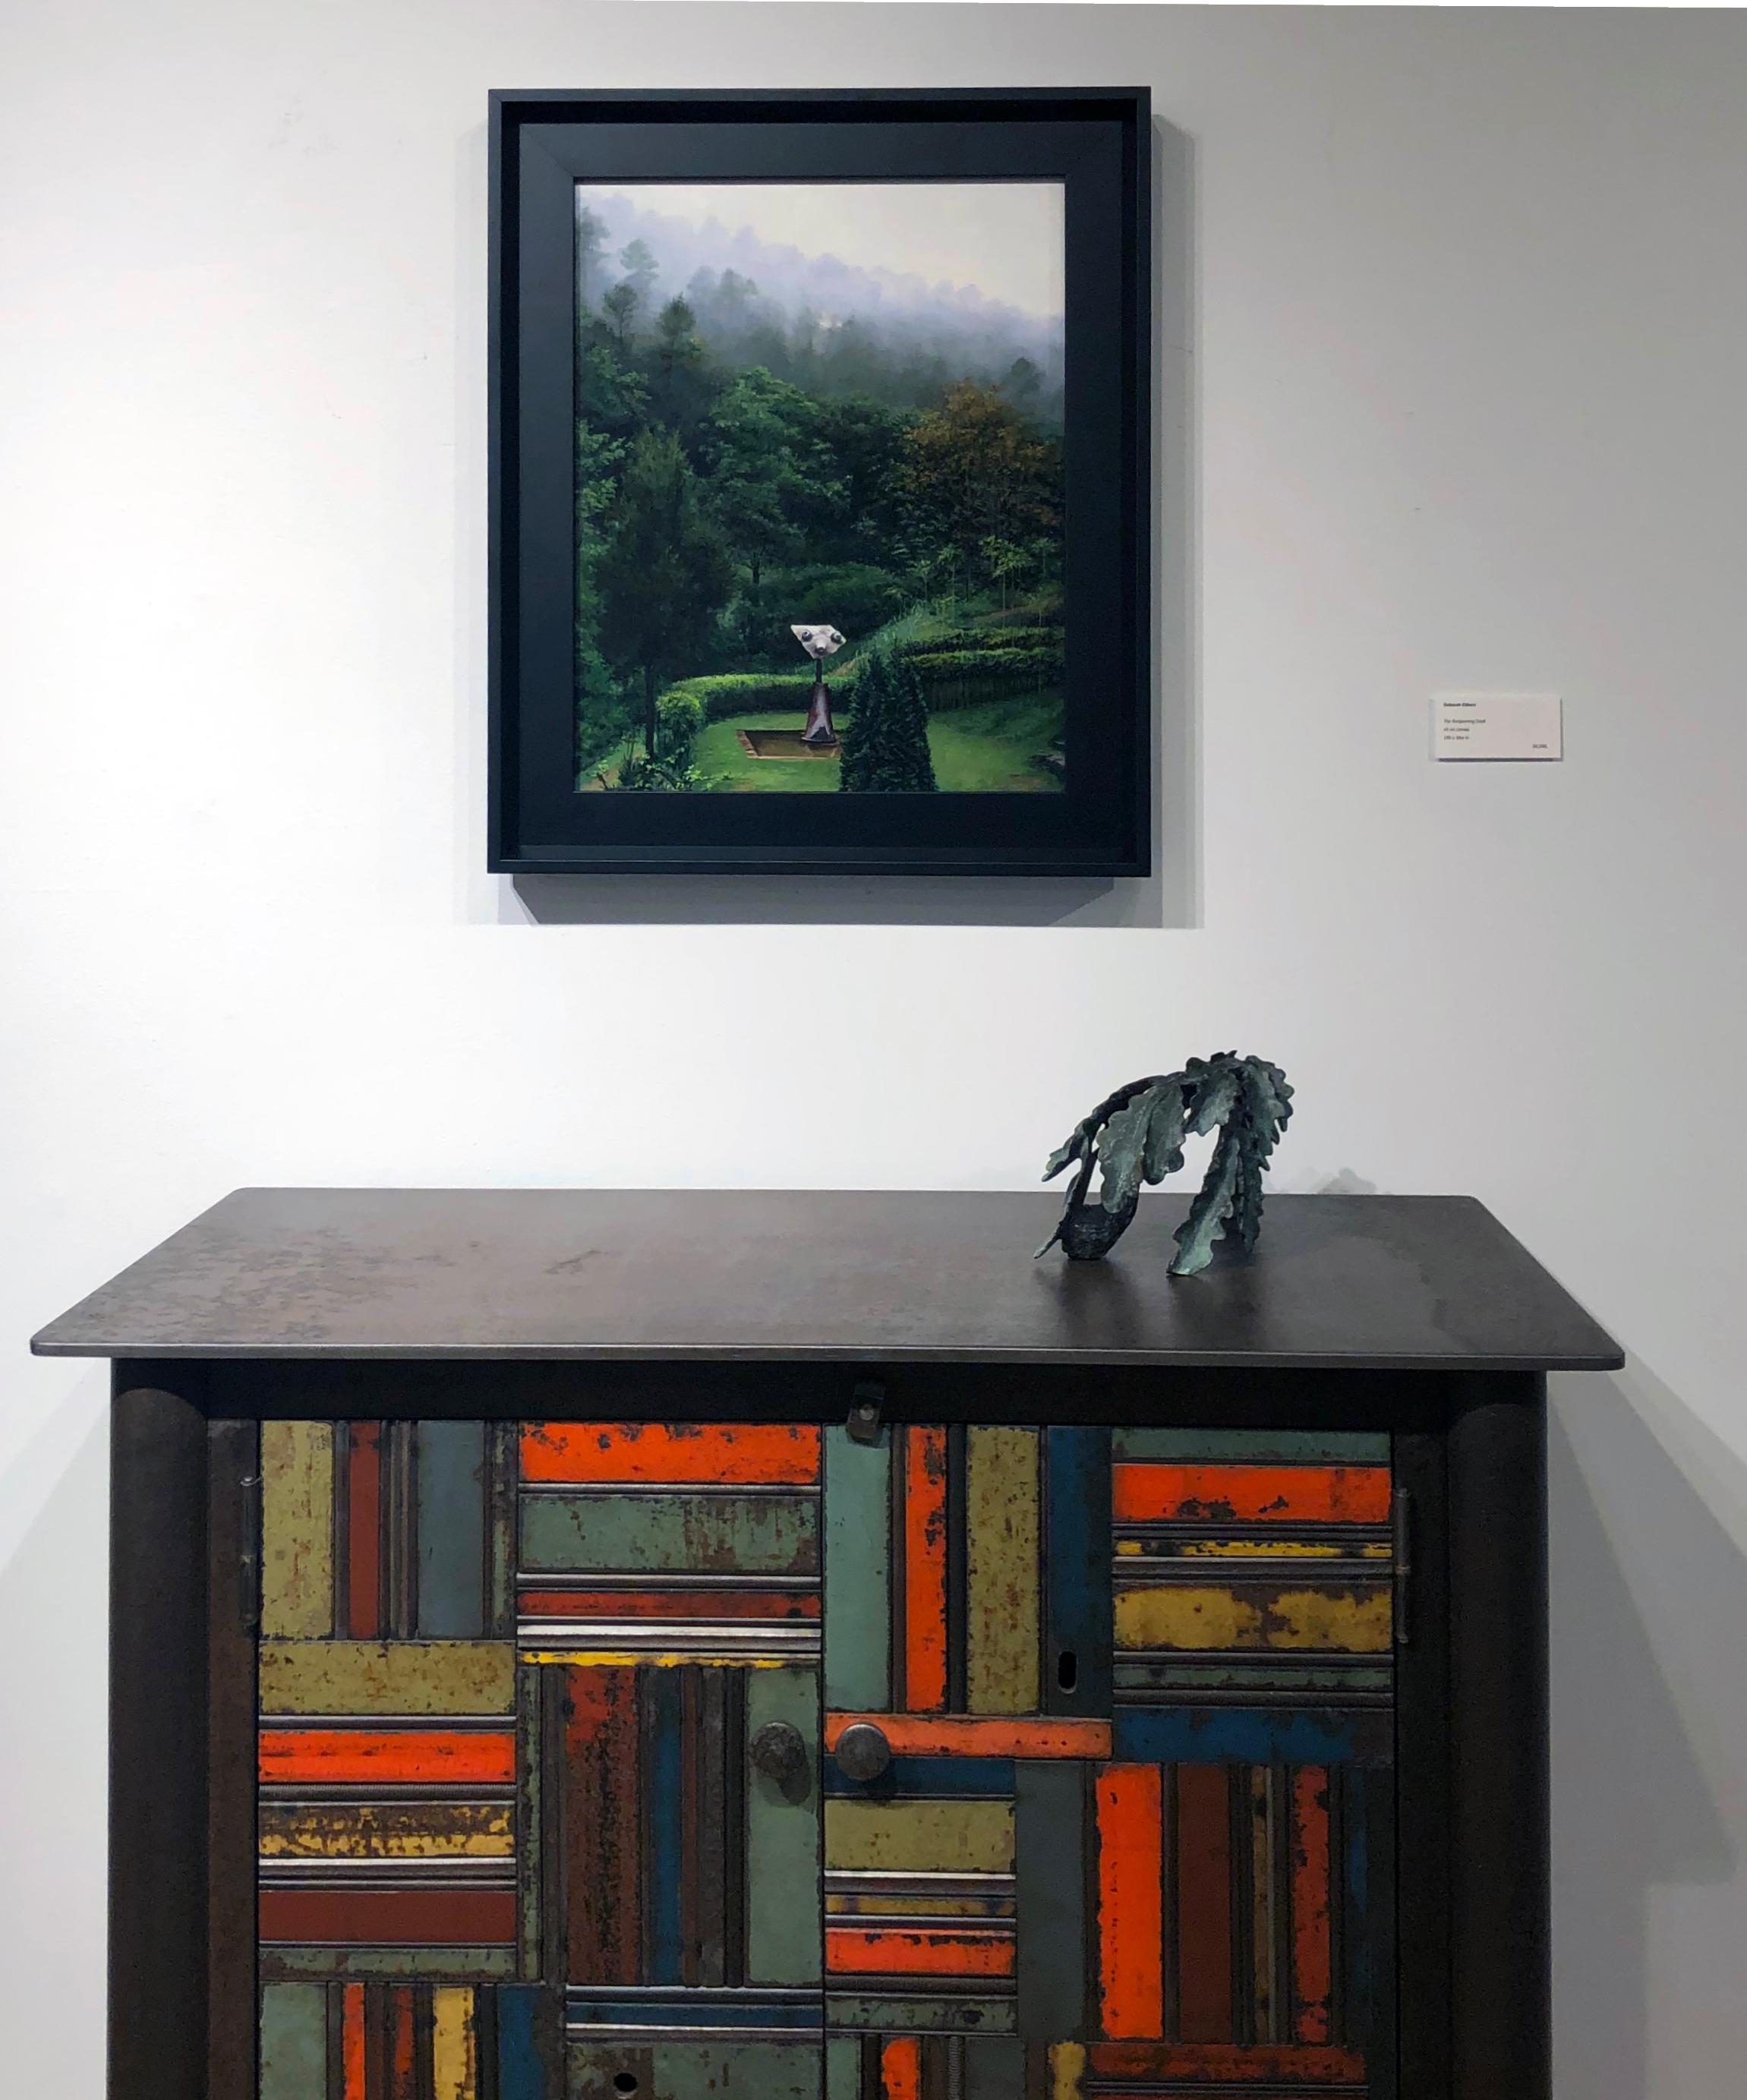 Gallifa Muse - Lush Green Spanish Landscape with Miró Sculpture, Oil on Panel - Painting by Carol Pylant